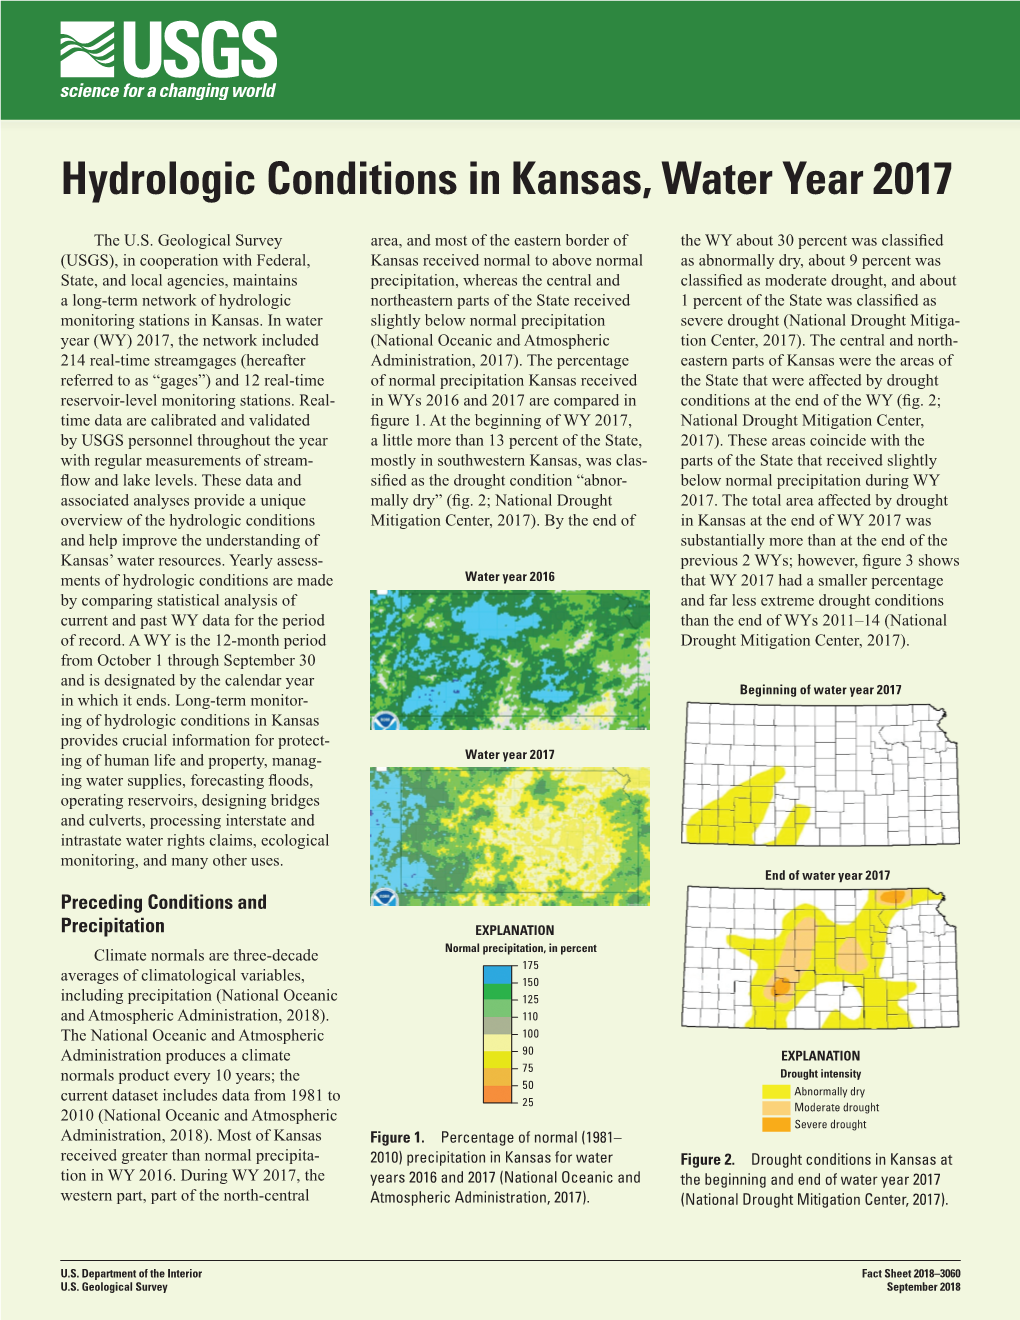 Hydrologic Conditions in Kansas, Water Year 2017